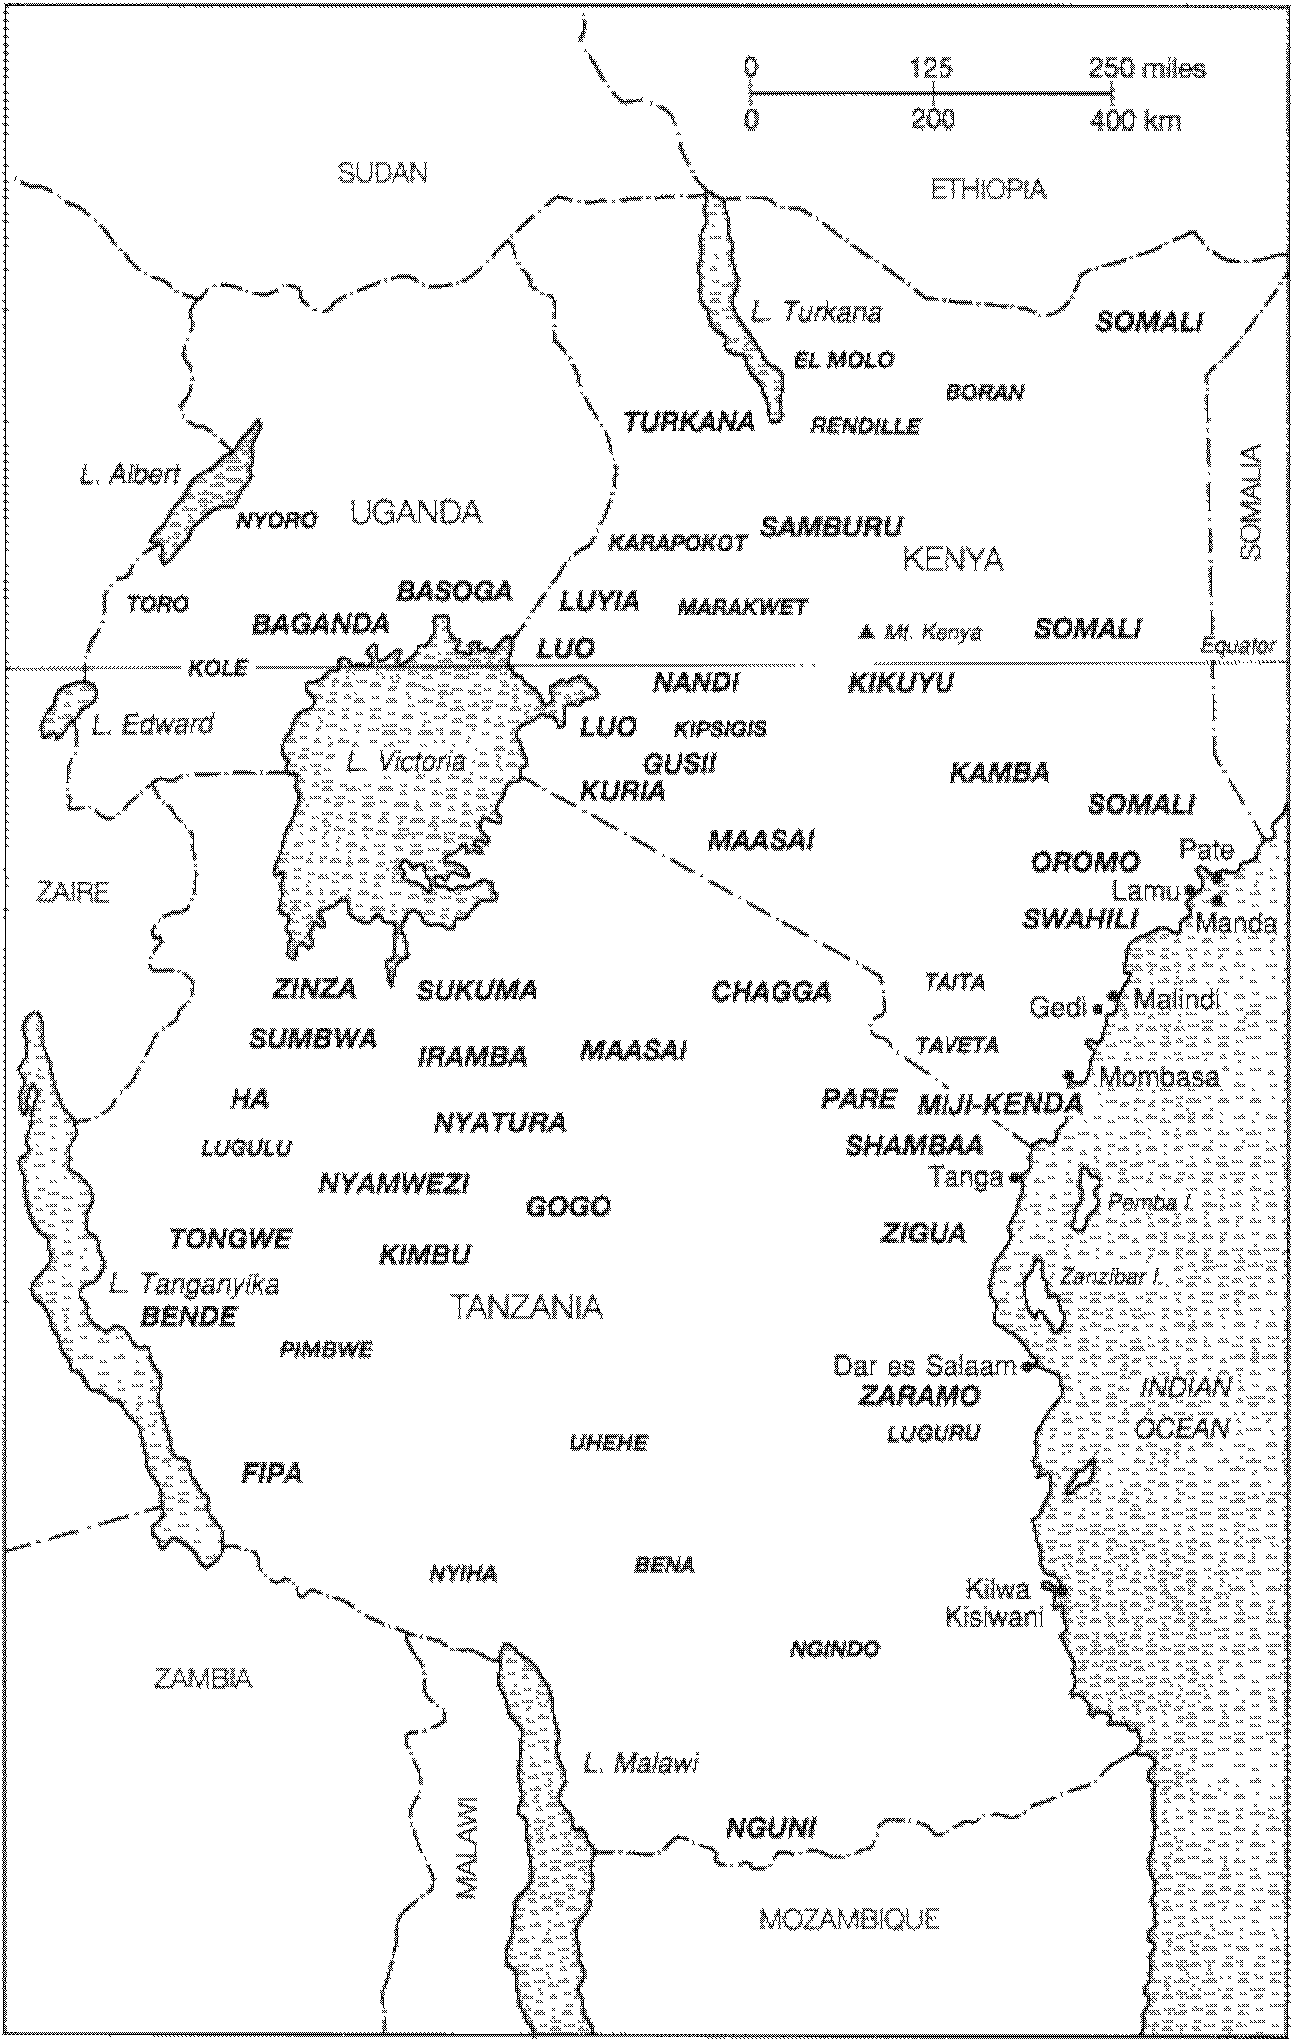 Ethnic groups of Kenya and Tanzania Source; adapted from map drawn by M. Kivuva.png